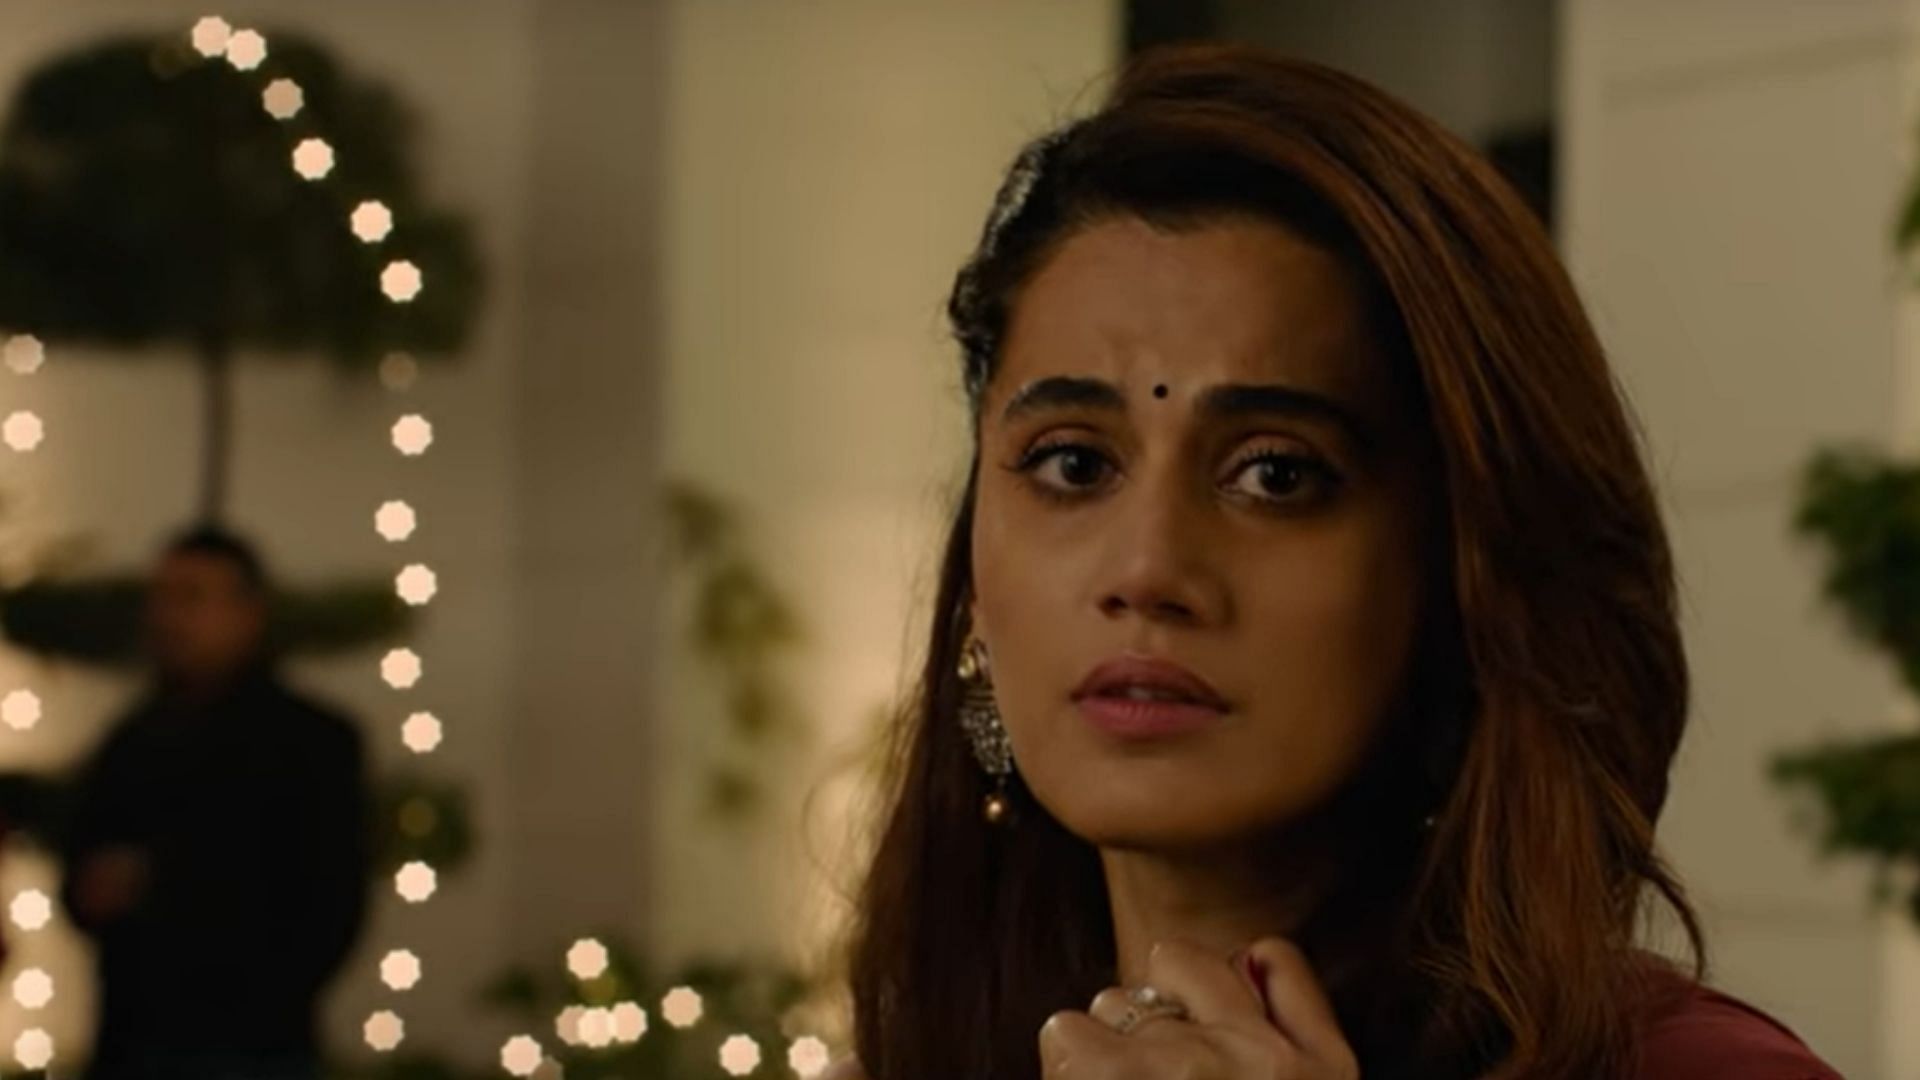 Taapsee Pannu in a still from the second trailer of <i>Thappad</i>.